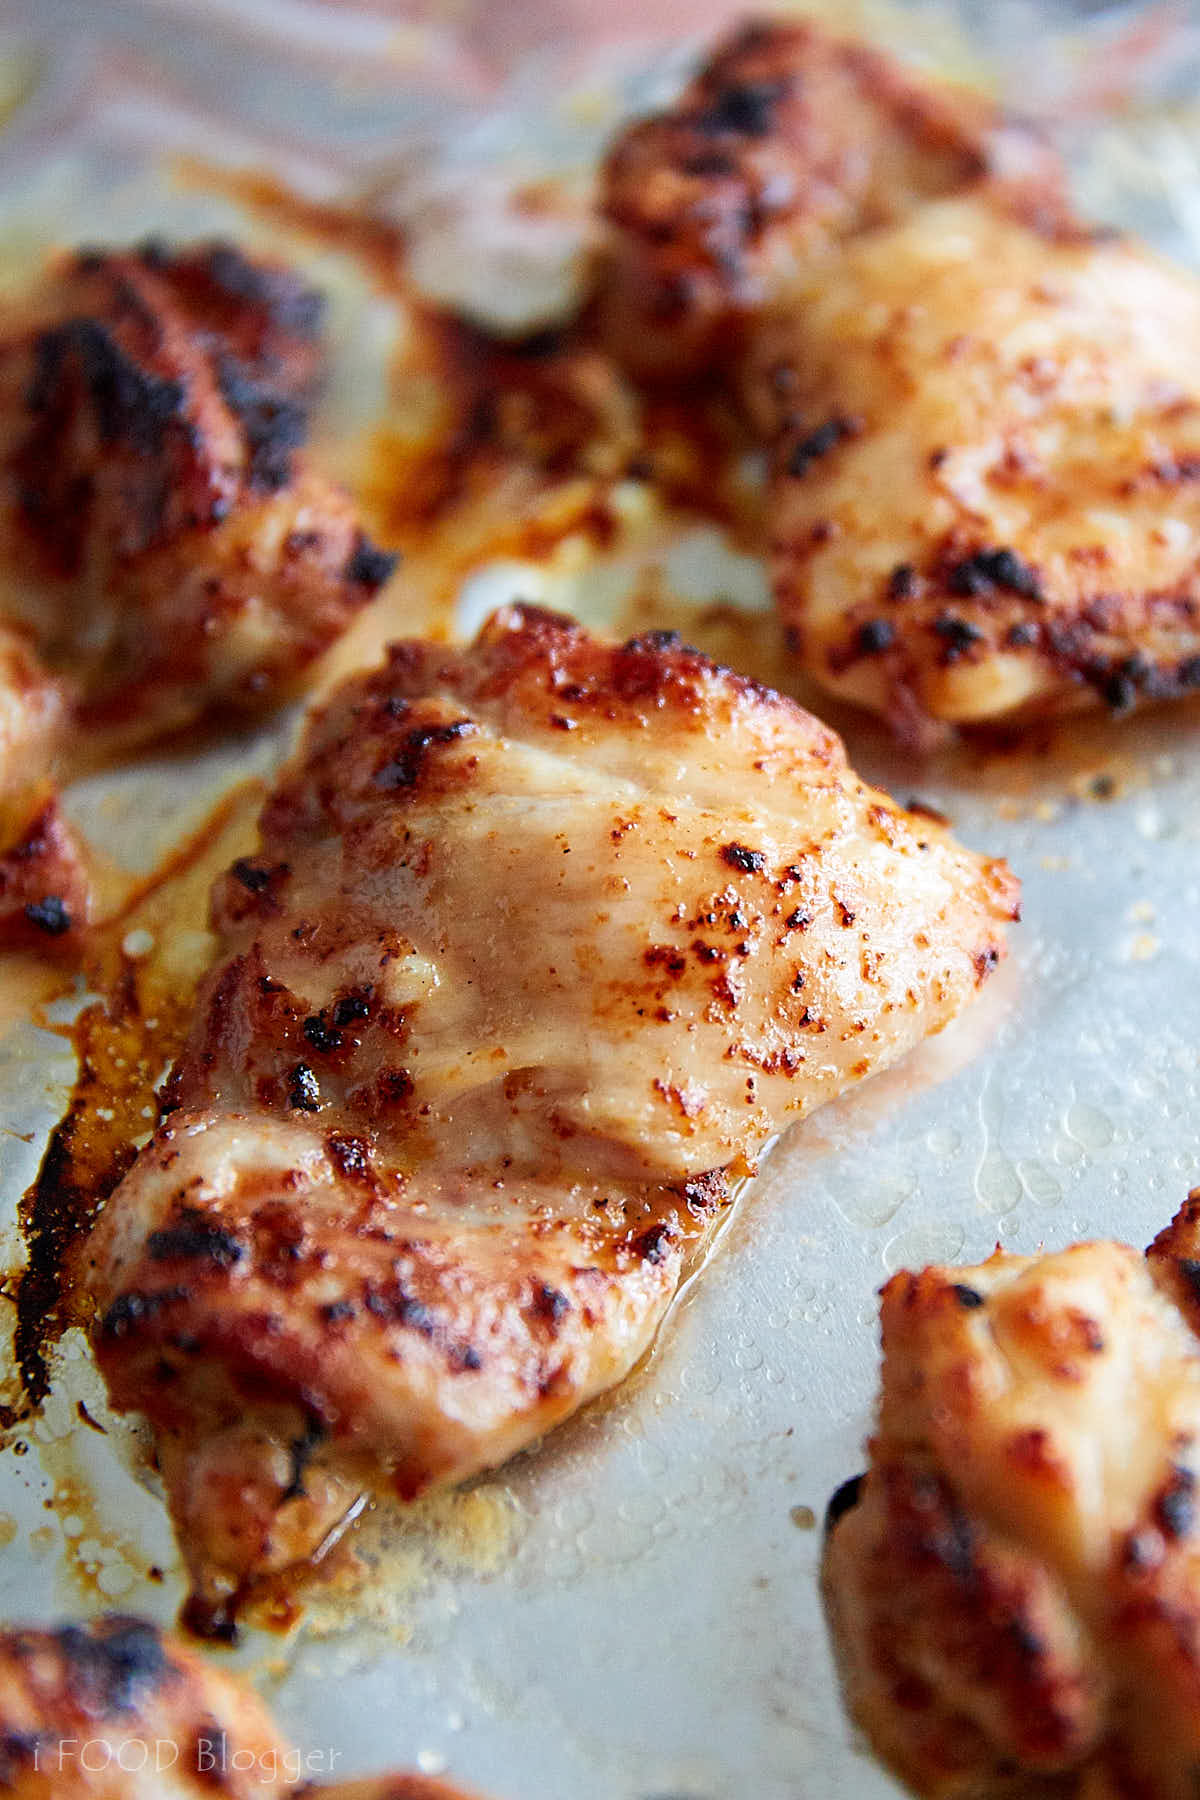 Close up view of a juicy, crispy broiled chicken thigh.